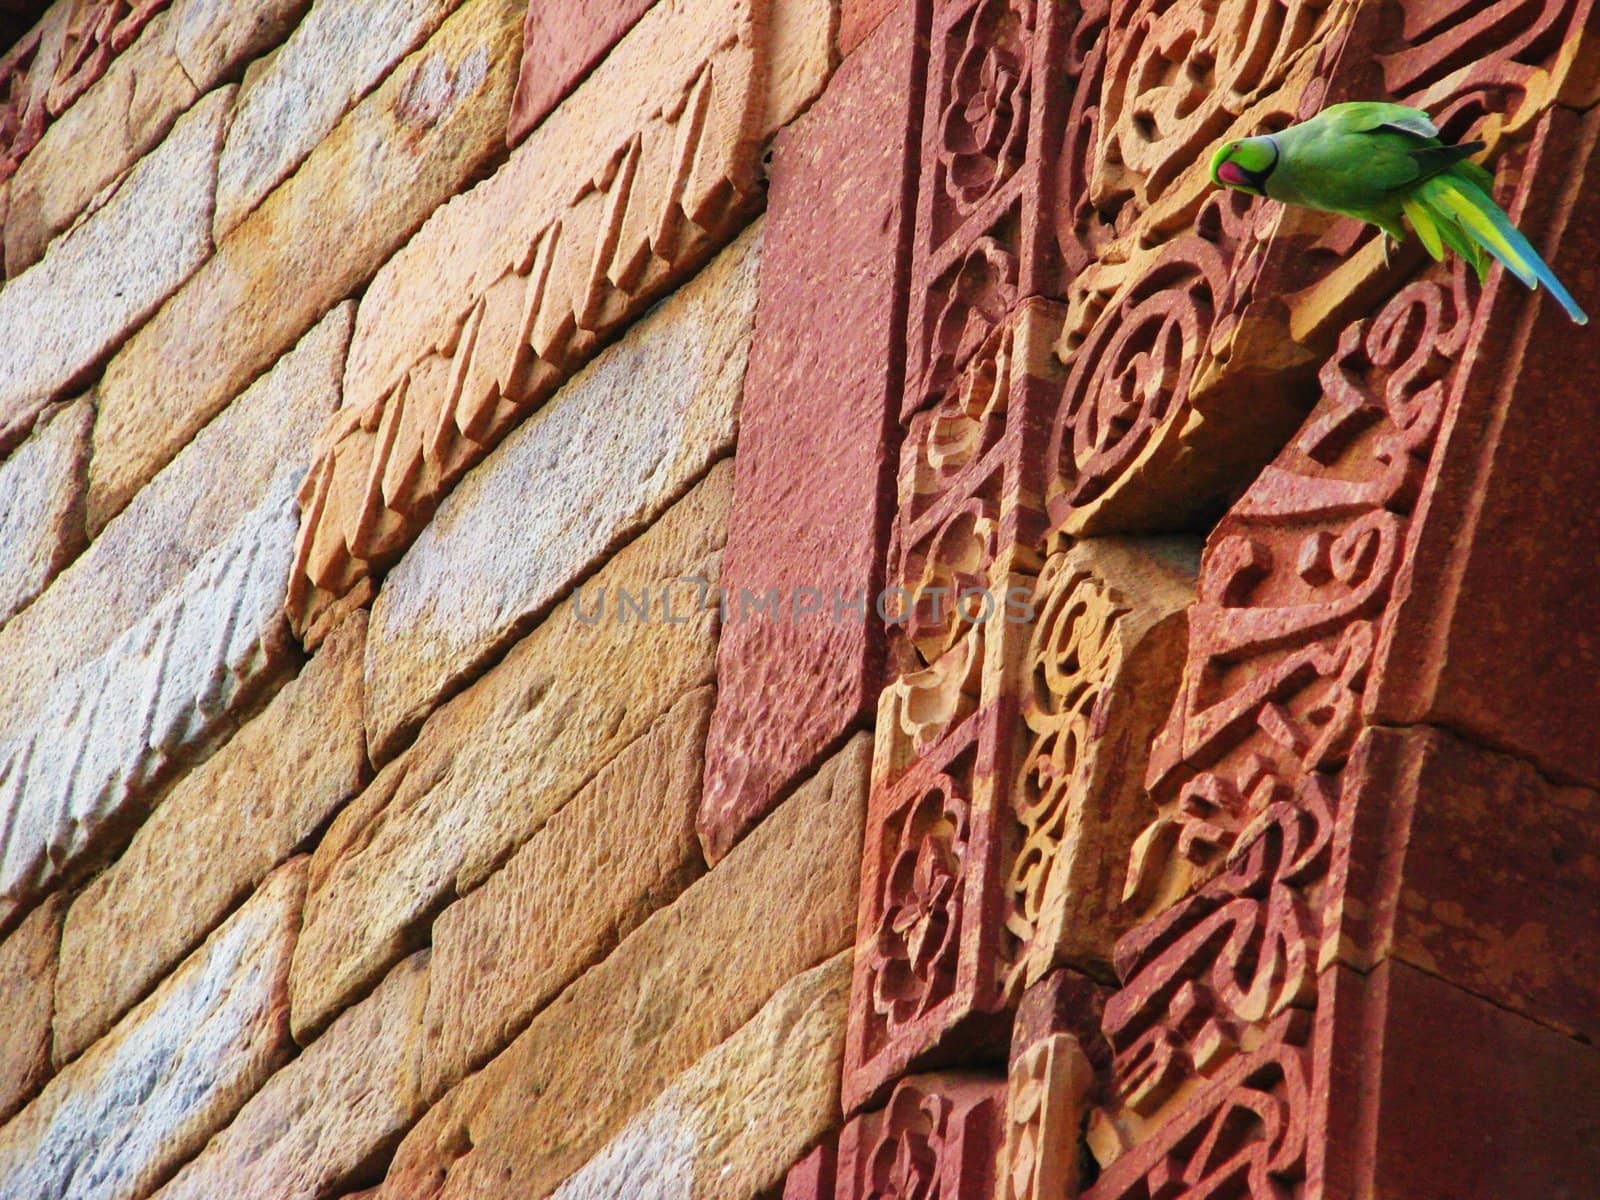 A parrot sitting on the carvings at Qutab Minar in New Delhi, India.